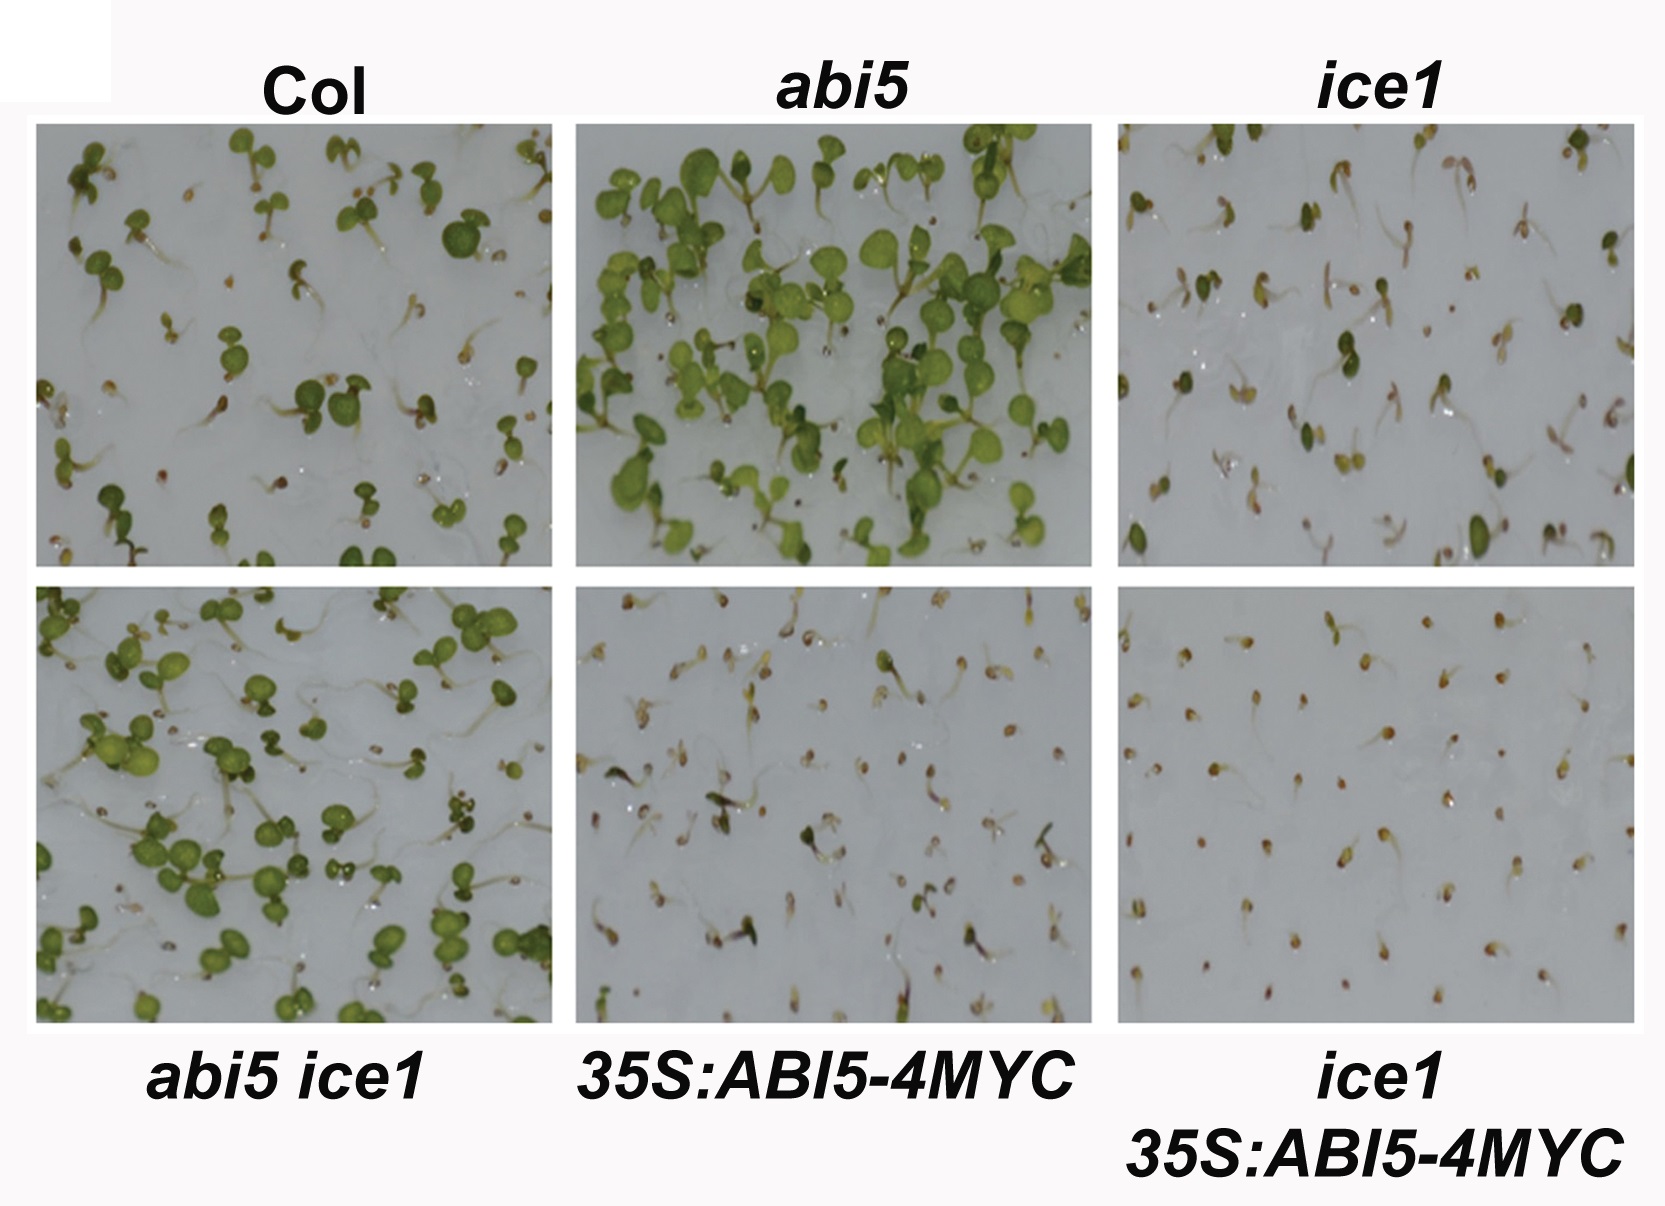 Seedlings of the abi5 ice1 double mutant and other related mutants or transgenic plants 6 days after germination on medium containing 0.5 μM ABA..jpg